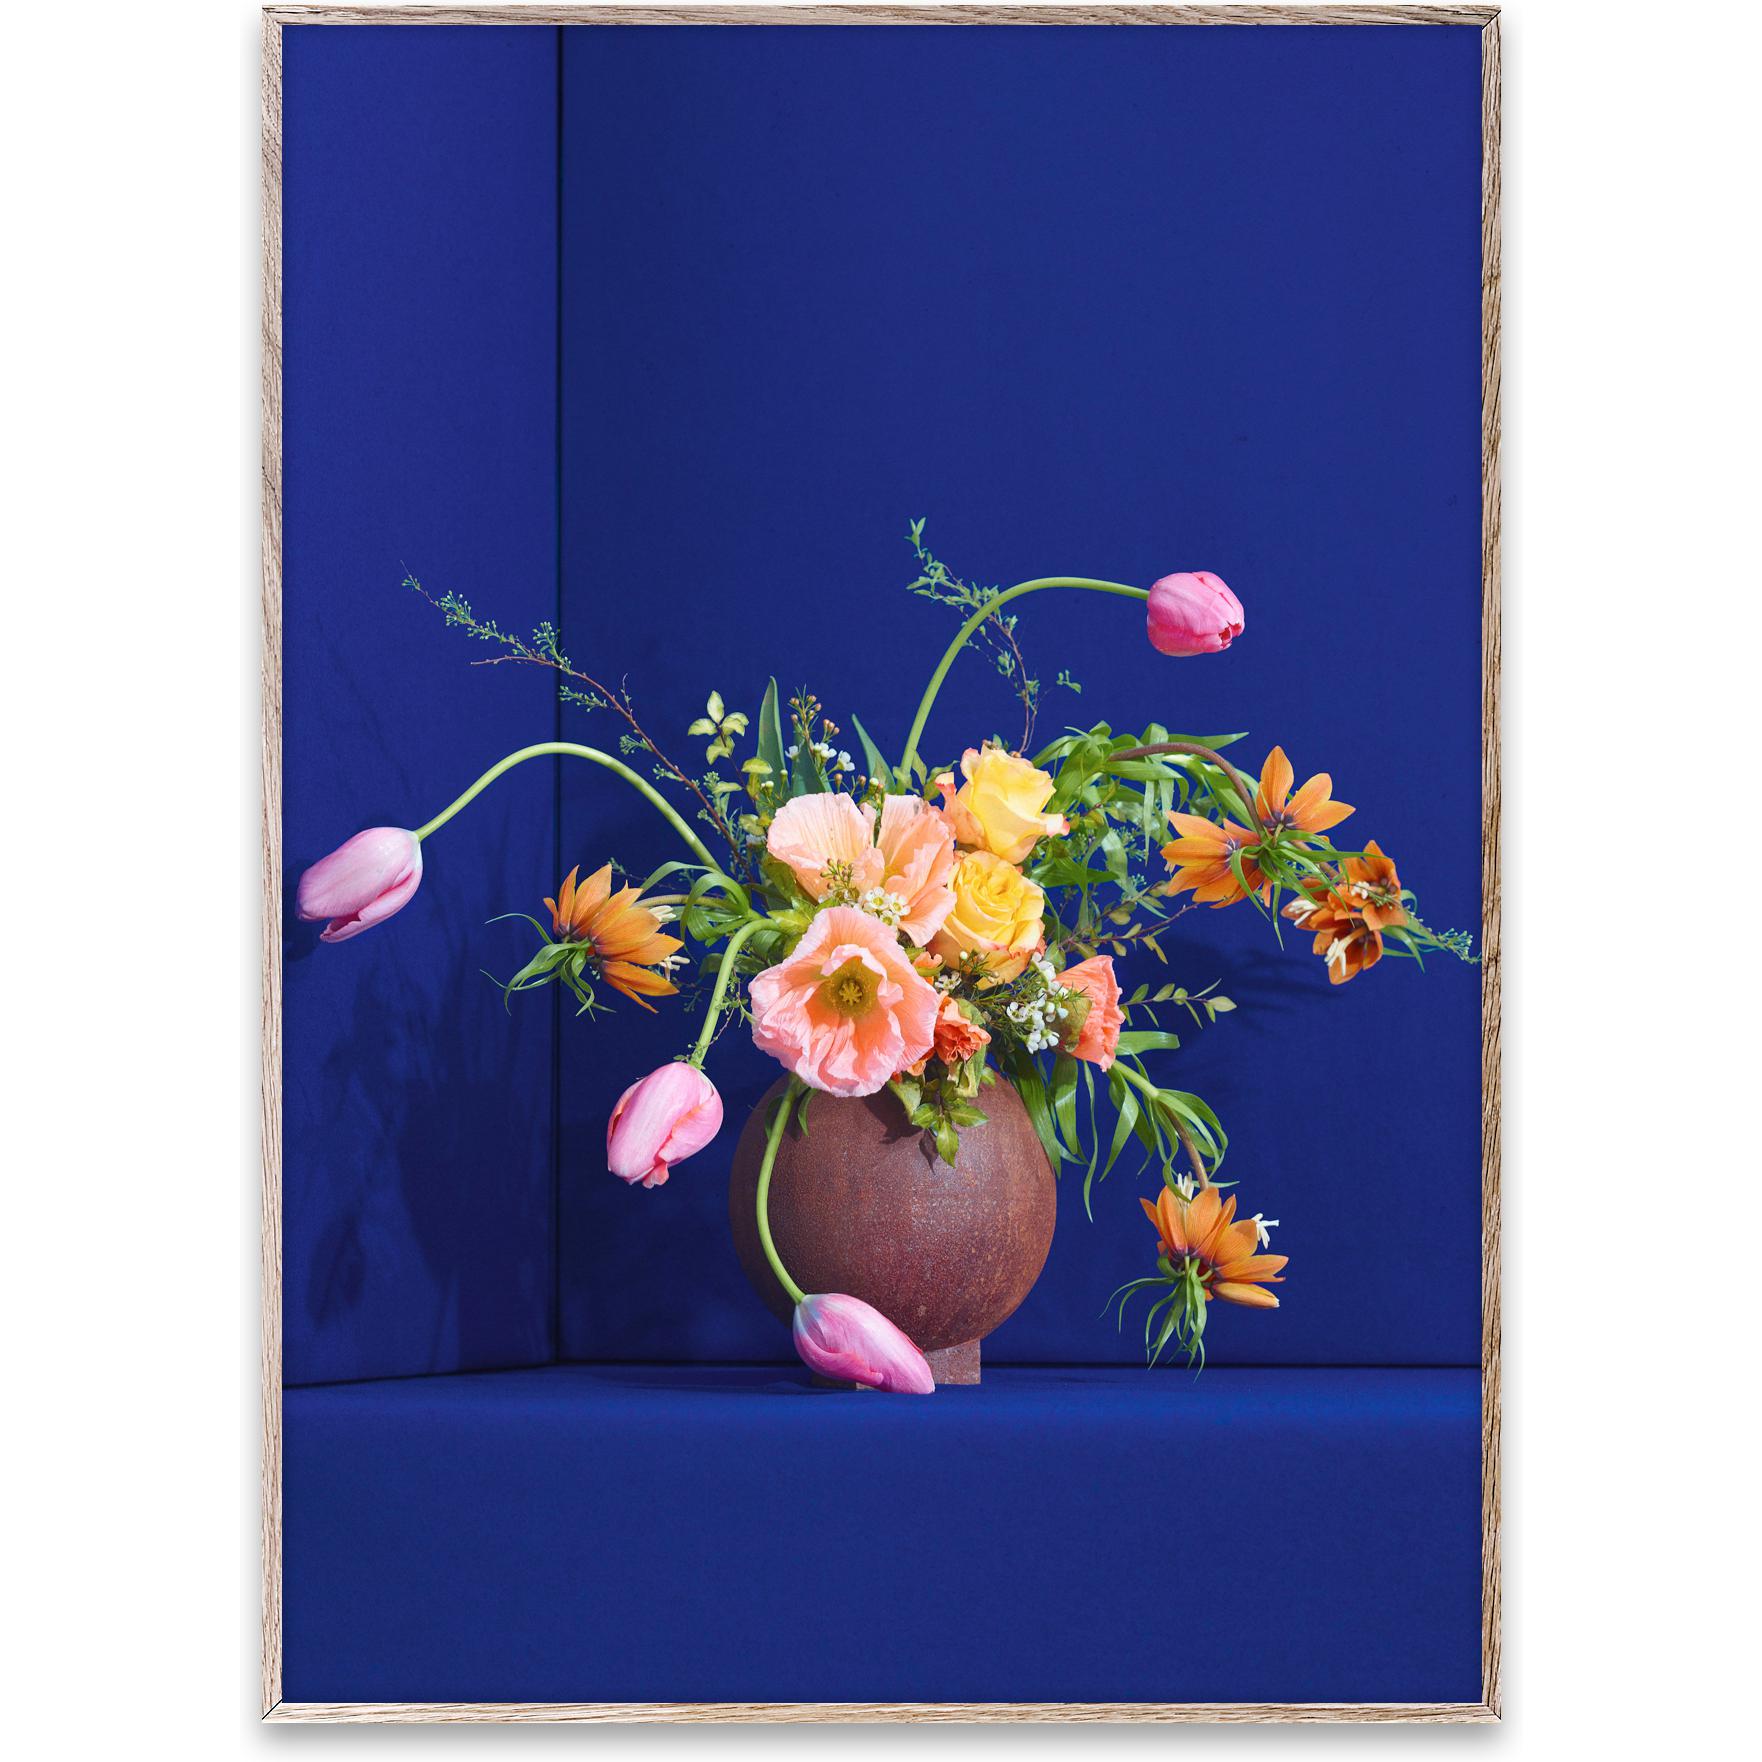 Paper Collective Blomst 01 Poster 50x70 Cm, Blue